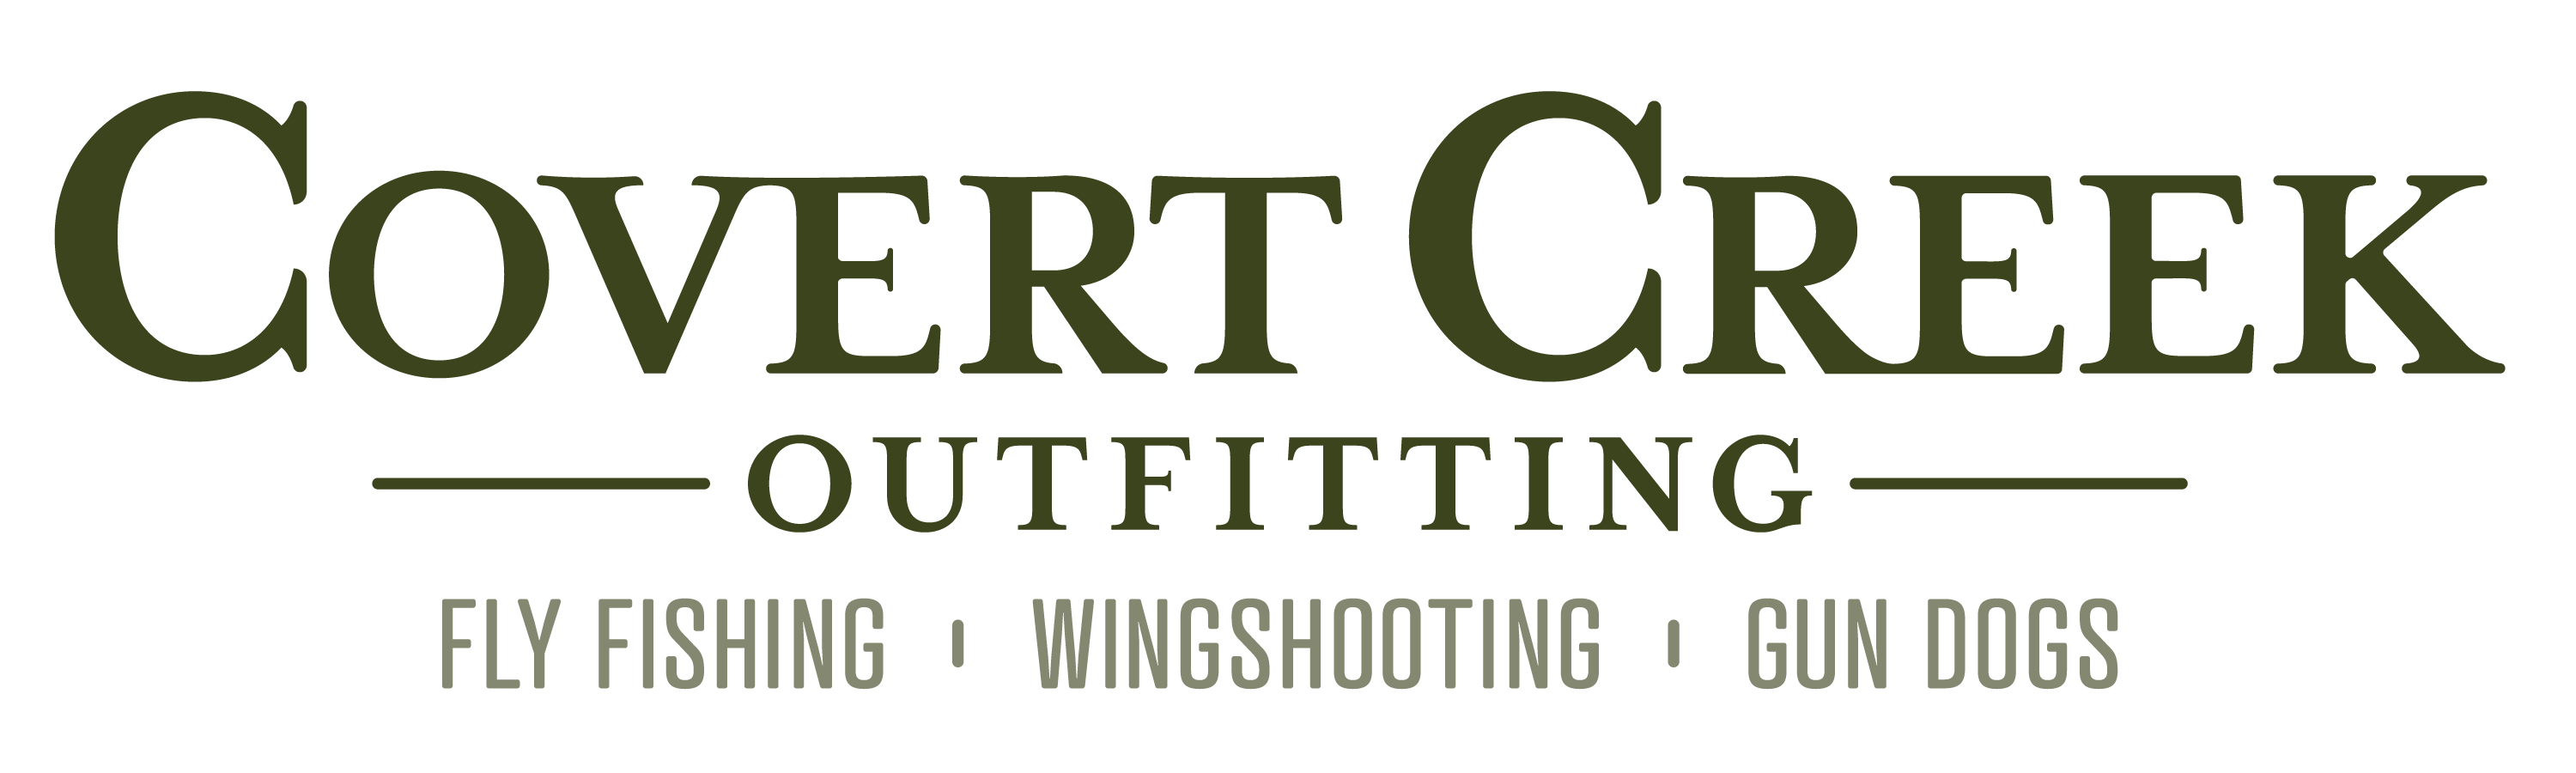 Covert Creek Outfitting – Catskill Mountain Fly Fishing & Upland Hunting